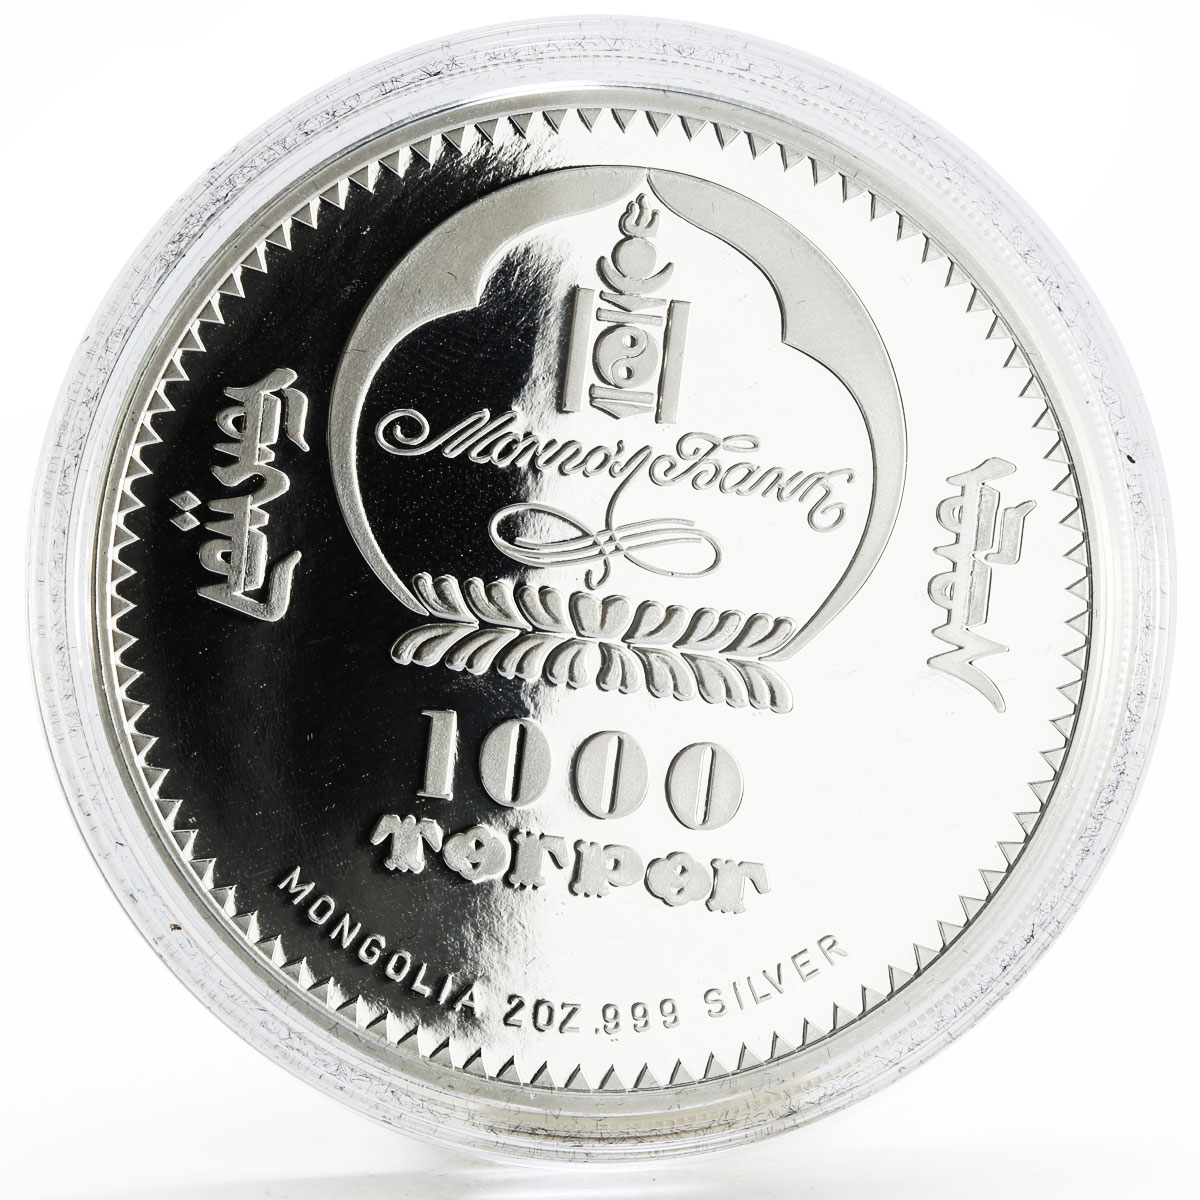 Mongolia 1000 togrog Tsars of Russia series Peter I the Great silver coin 2007